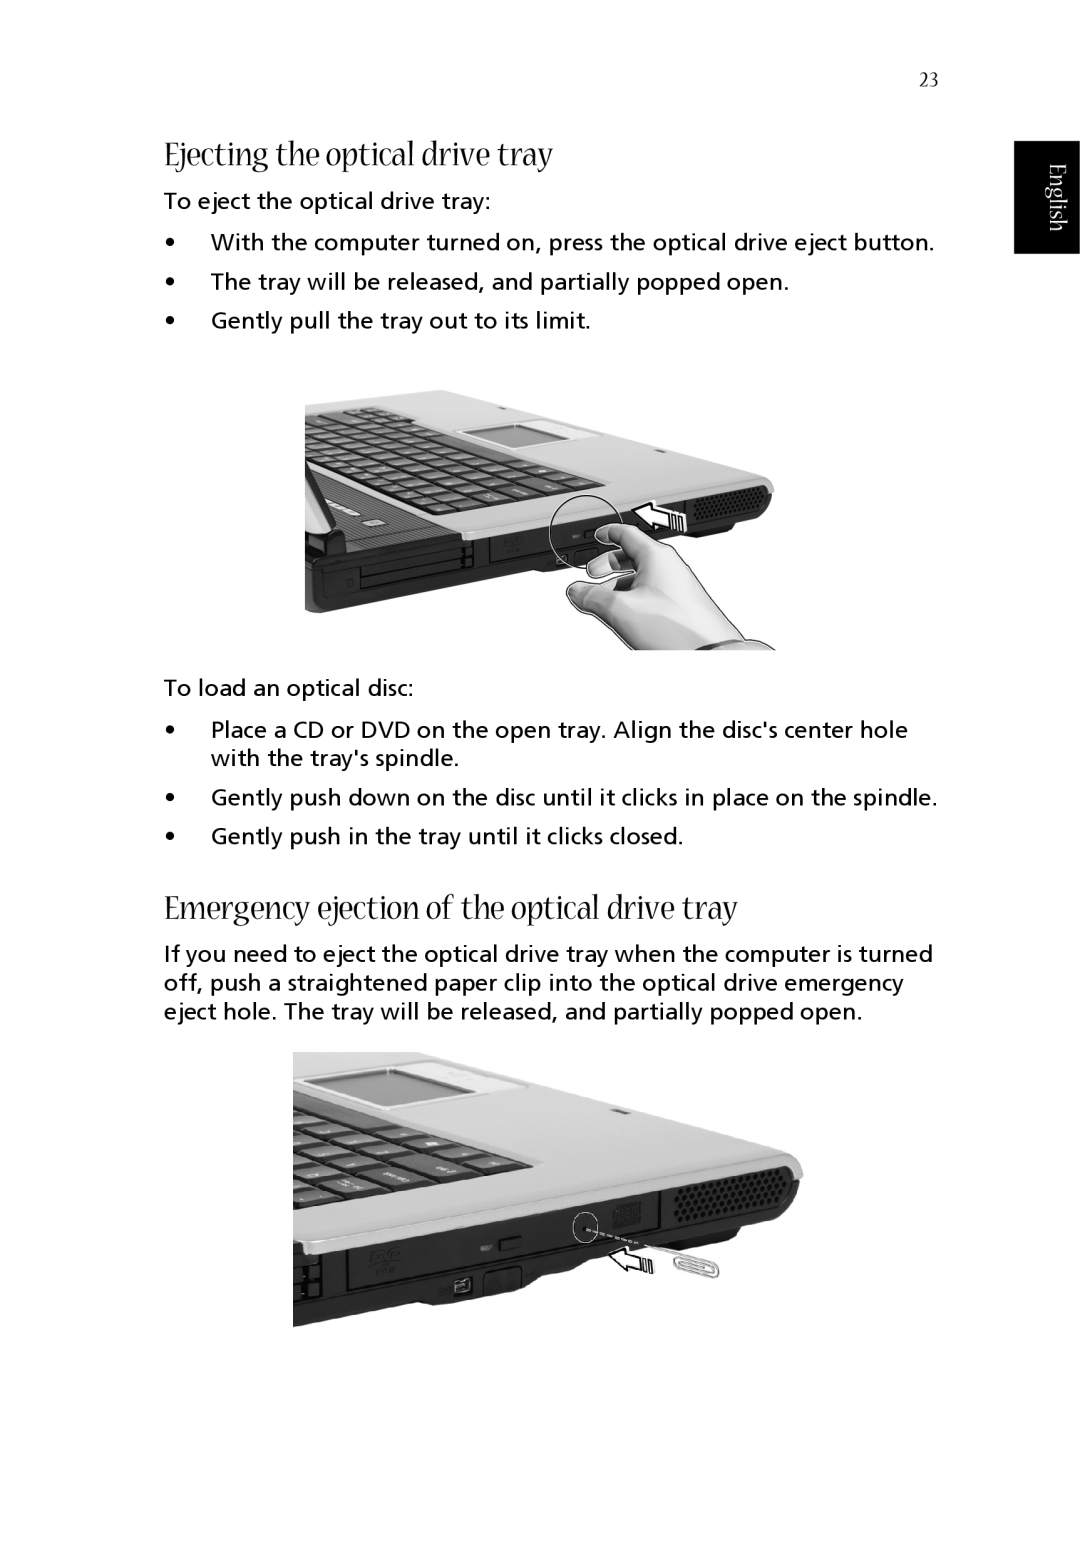 Acer 1360 manual Ejecting the optical drive tray, Emergency ejection of the optical drive tray, English 